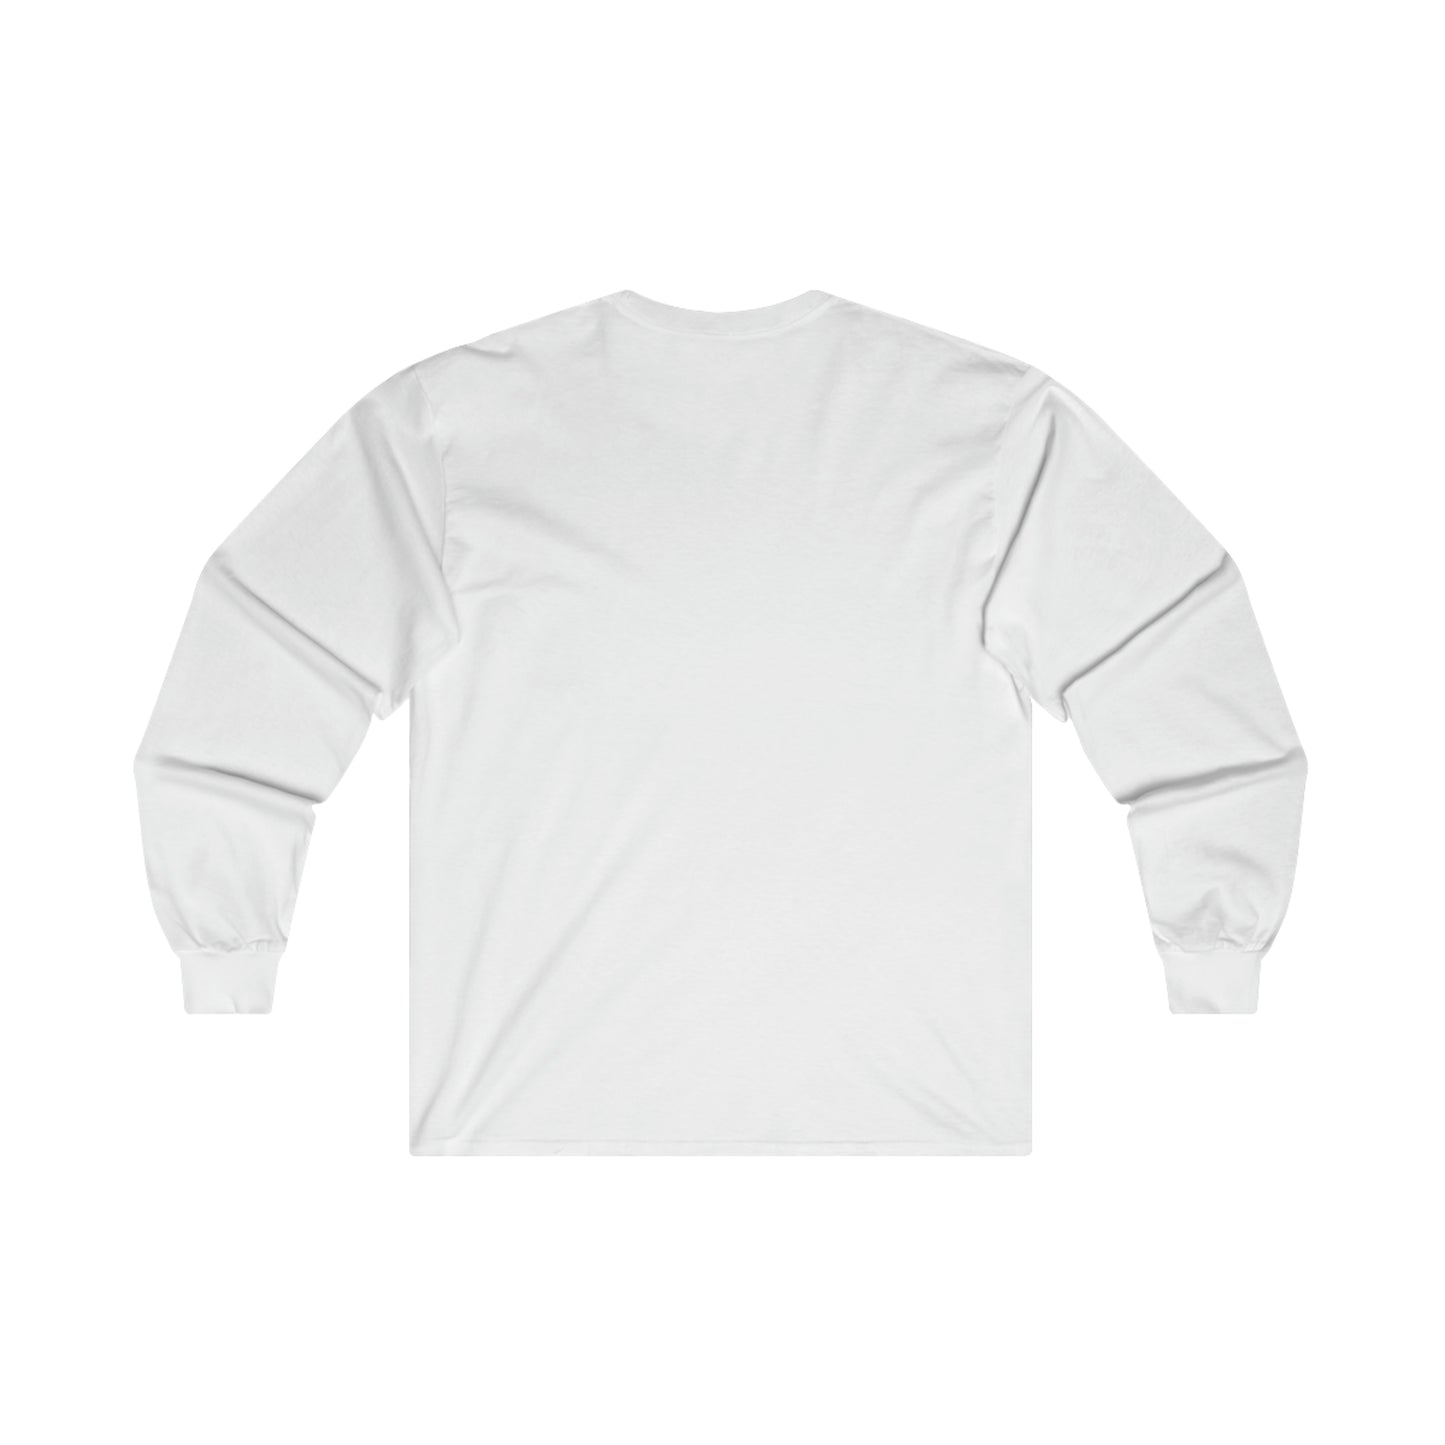 Canadian Maple Leaf Ultra Cotton Long Sleeve Tee